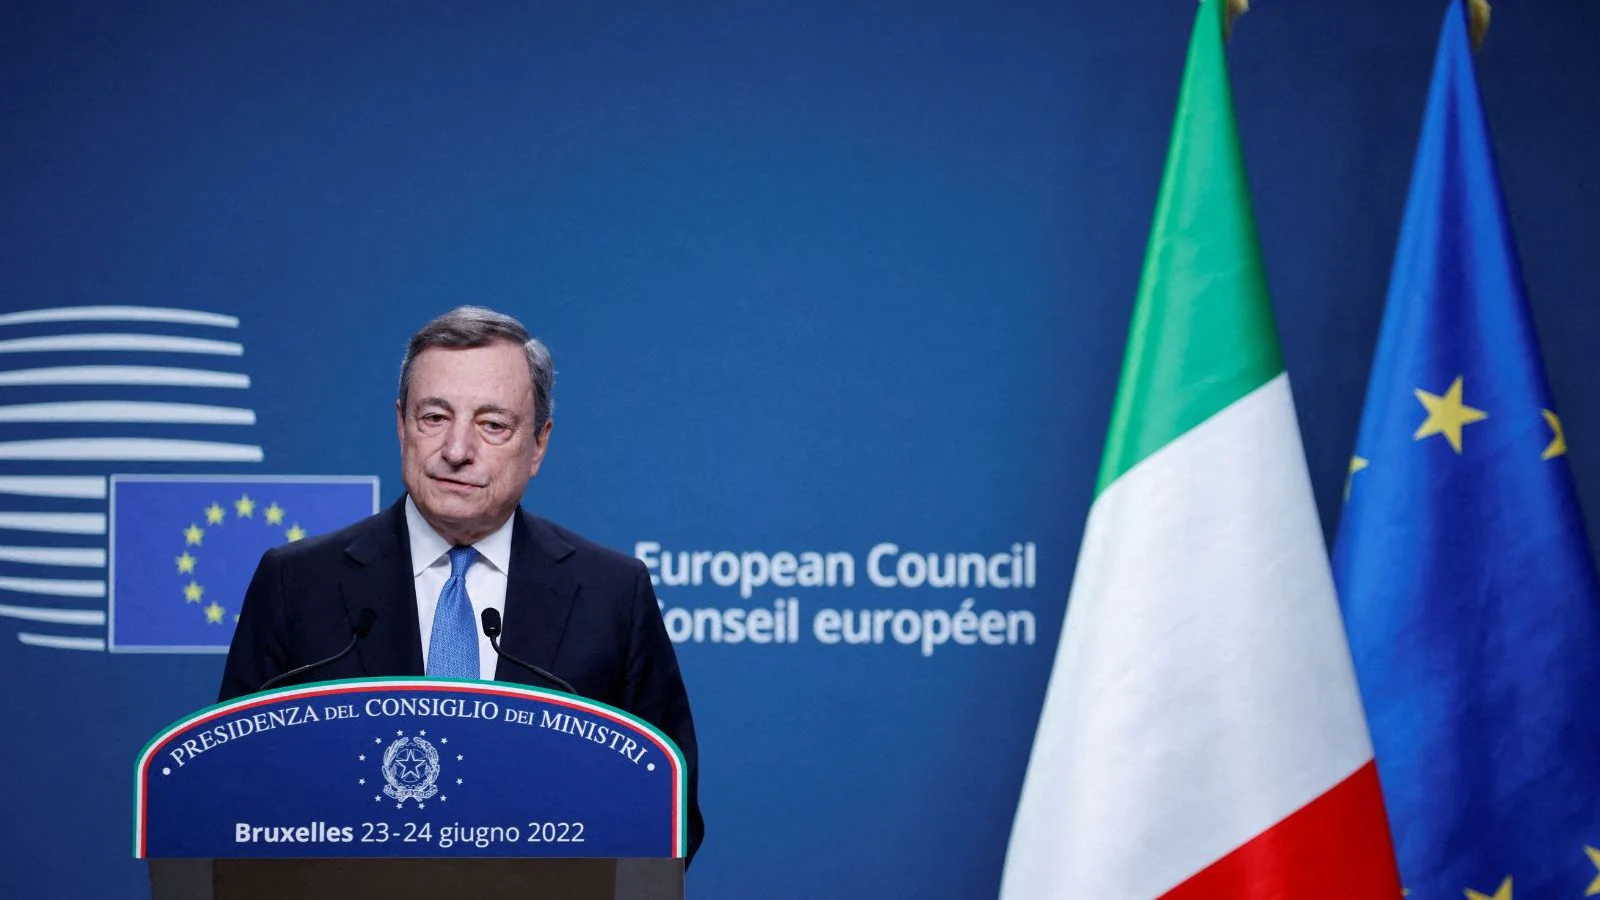 Italy’s President Refuses PM Draghi’s Resignation, Tells Him to Address Parliament